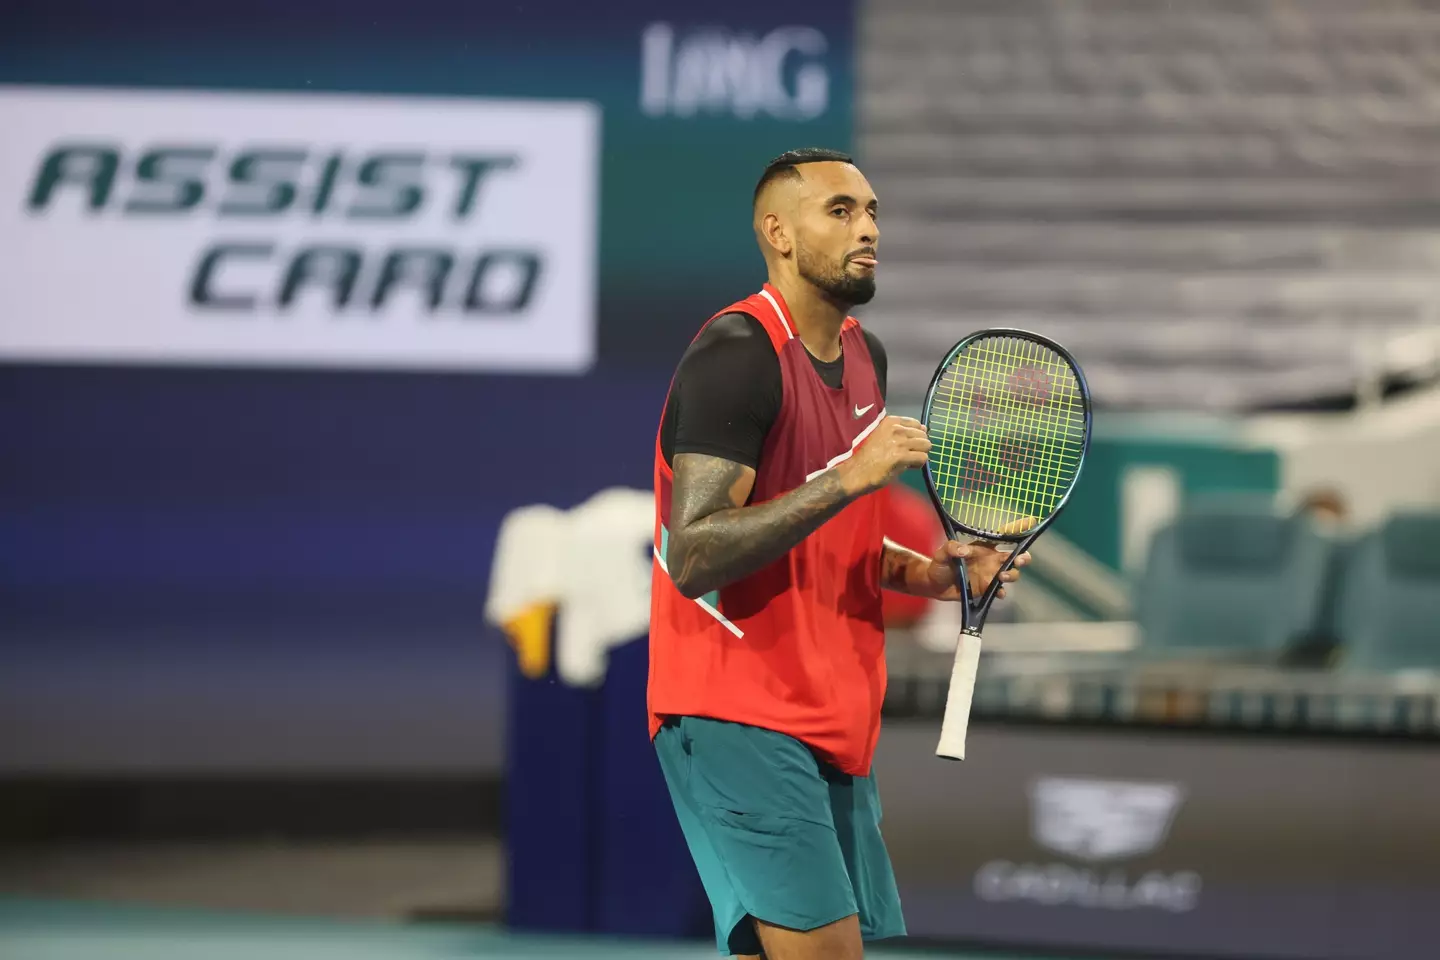 Kyrgios was fined for 'disgusting' behaviour including spitting and swearing at someone in his player's box.